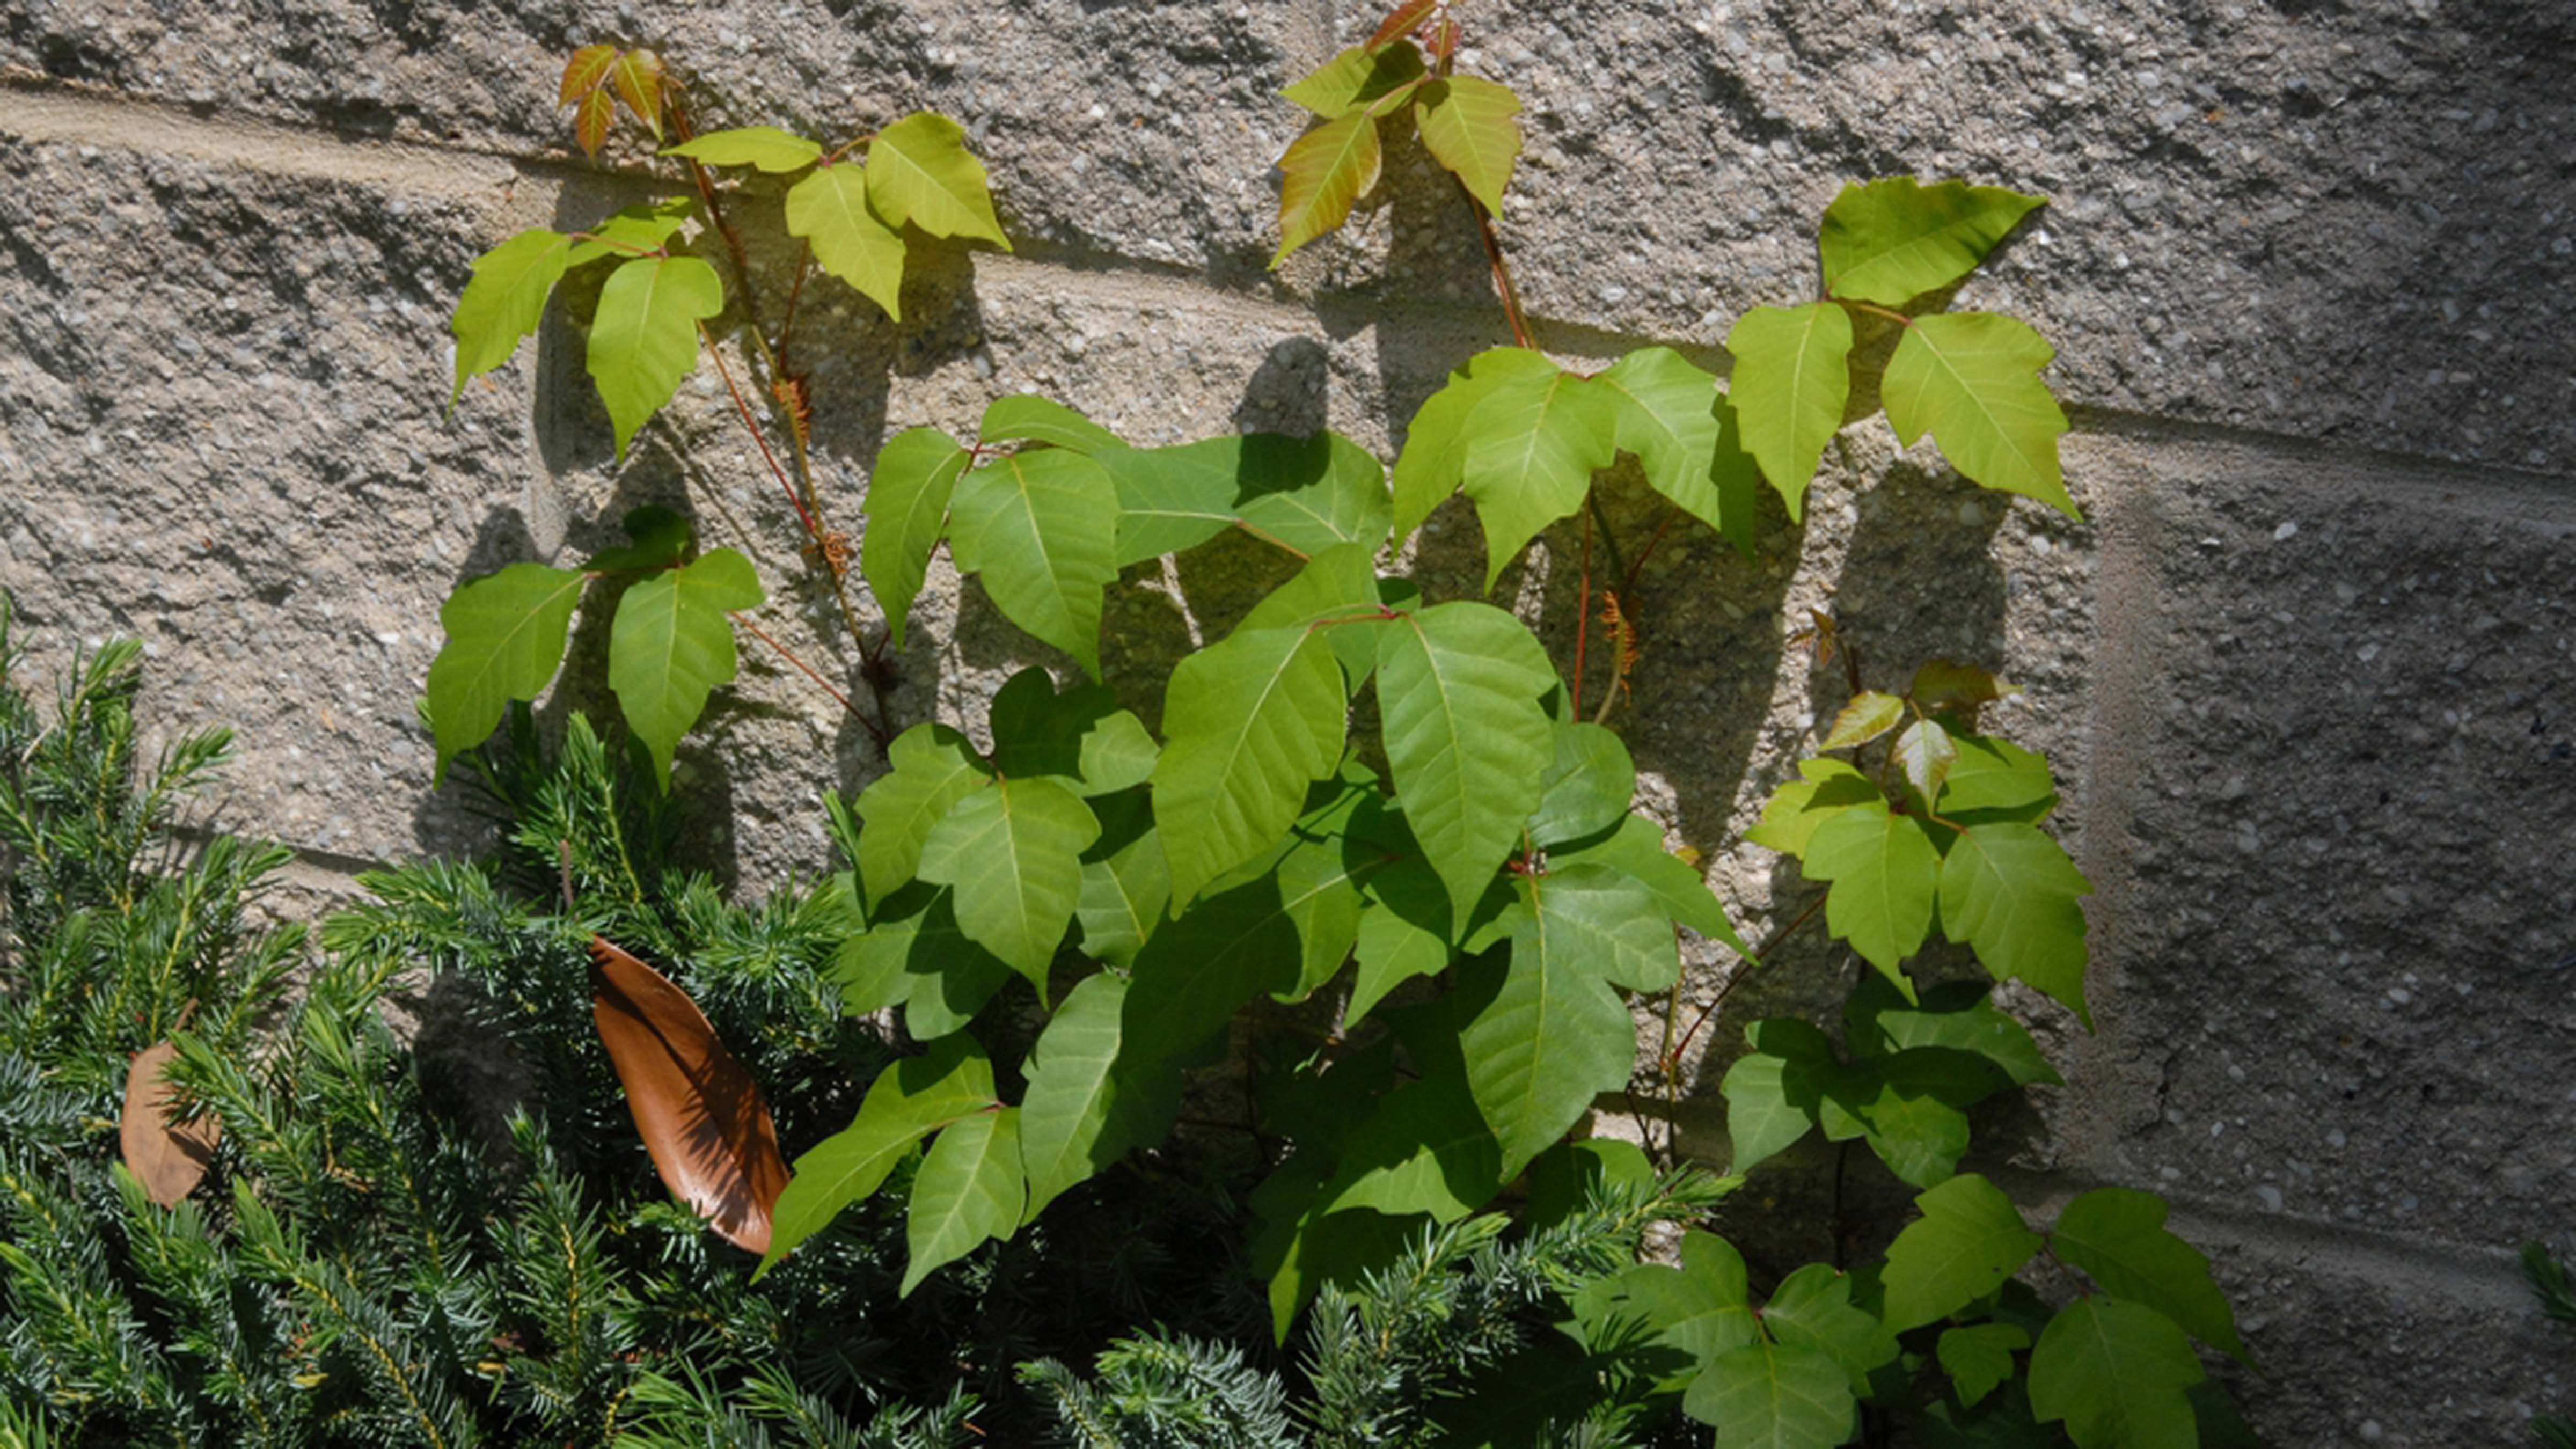 Toxicodendron radicans, commonly known as Poison ivy, vines on a stone wall